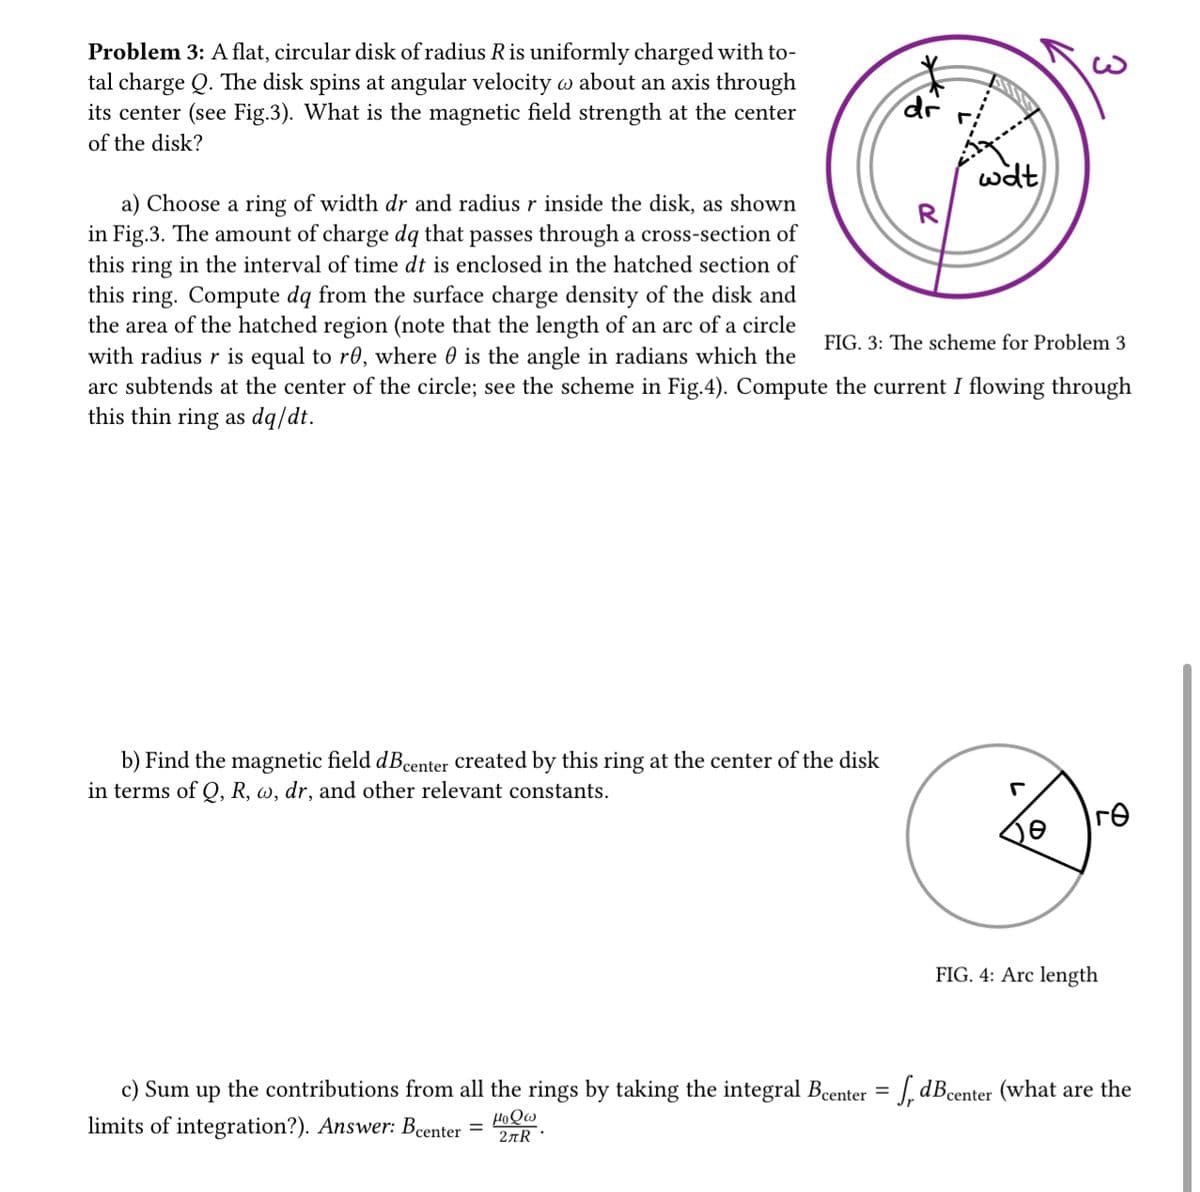 Problem 3: A flat, circular disk of radius R is uniformly charged with to-
tal charge Q. The disk spins at angular velocity @ about an axis through
its center (see Fig.3). What is the magnetic field strength at the center
of the disk?
dr
b) Find the magnetic field dBcenter created by this ring at the center of the disk
in terms of Q, R, w, dr, and other relevant constants.
wat
R
a) Choose a ring of width dr and radius r inside the disk, as shown
in Fig.3. The amount of charge dq that passes through a cross-section of
this ring in the interval of time dt is enclosed in the hatched section of
this ring. Compute dq from the surface charge density of the disk and
the area of the hatched region (note that the length of an arc of a circle
with radius r is equal to re, where is the angle in radians which the
arc subtends at the center of the circle; see the scheme in Fig.4). Compute the current I flowing through
this thin ring as dq/dt.
FIG. 3: The scheme for Problem 3
3
r
re
FIG. 4: Arc length
c) Sum up the contributions from all the rings by taking the integral Bcenter = f₁ dB center (what are the
limits of integration?). Answer: Bcenter =
μοθω
2лR